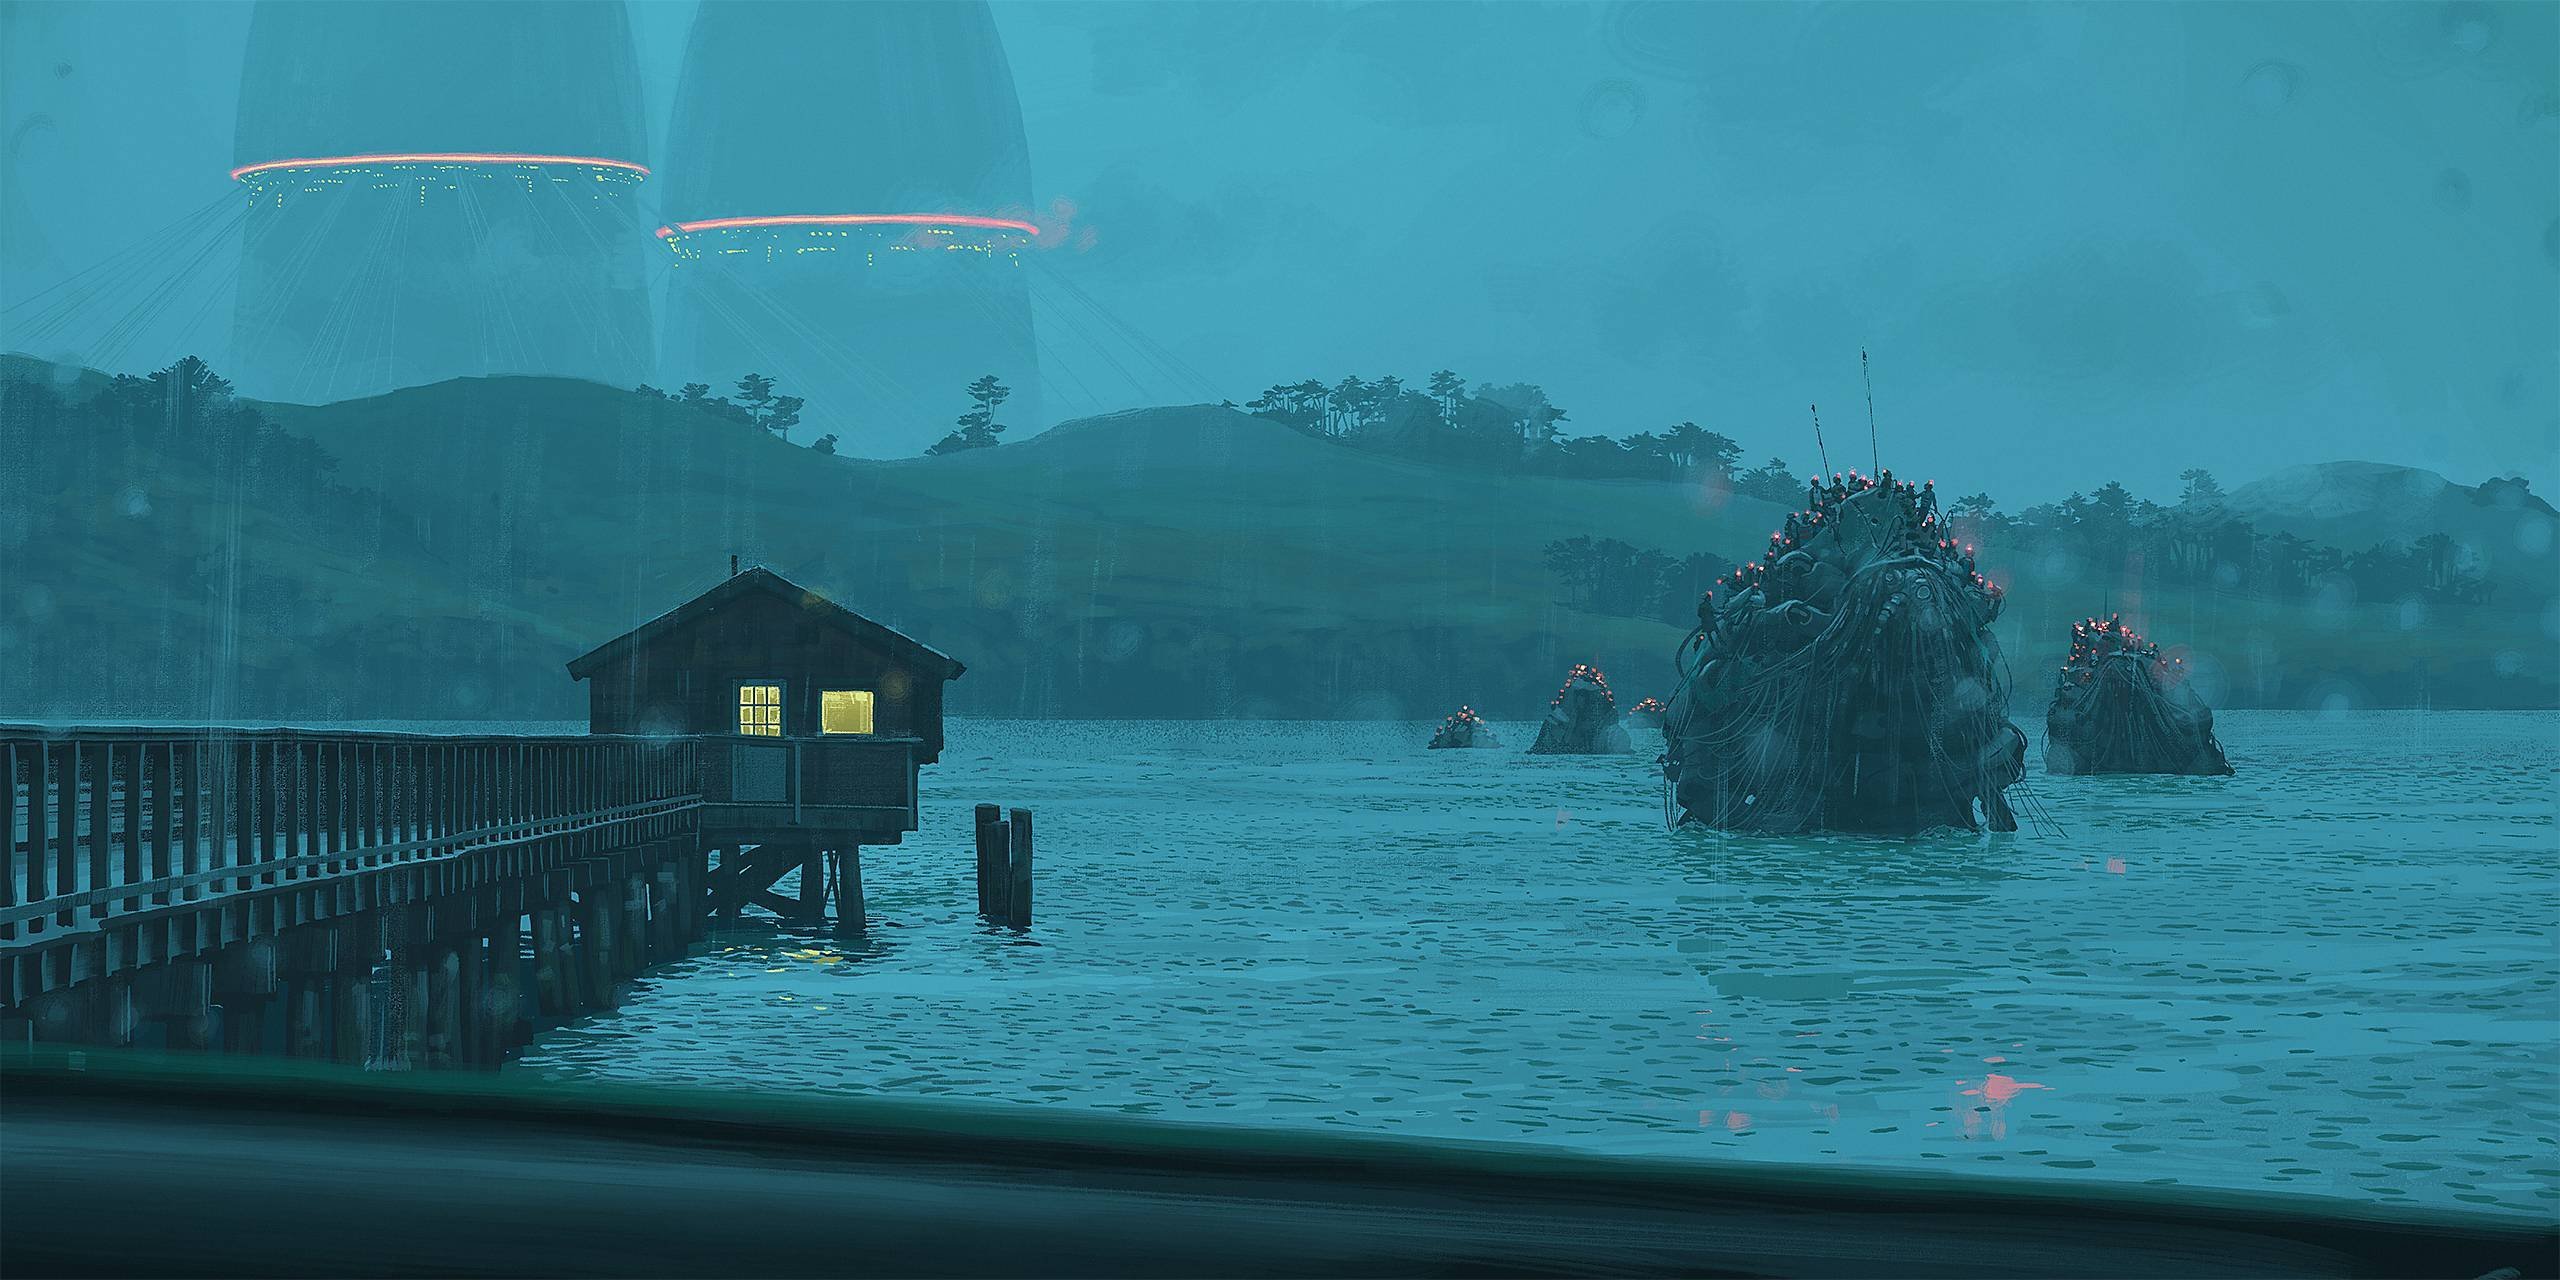 Stalenhag 4K wallpaper for your desktop or mobile screen free and easy to download